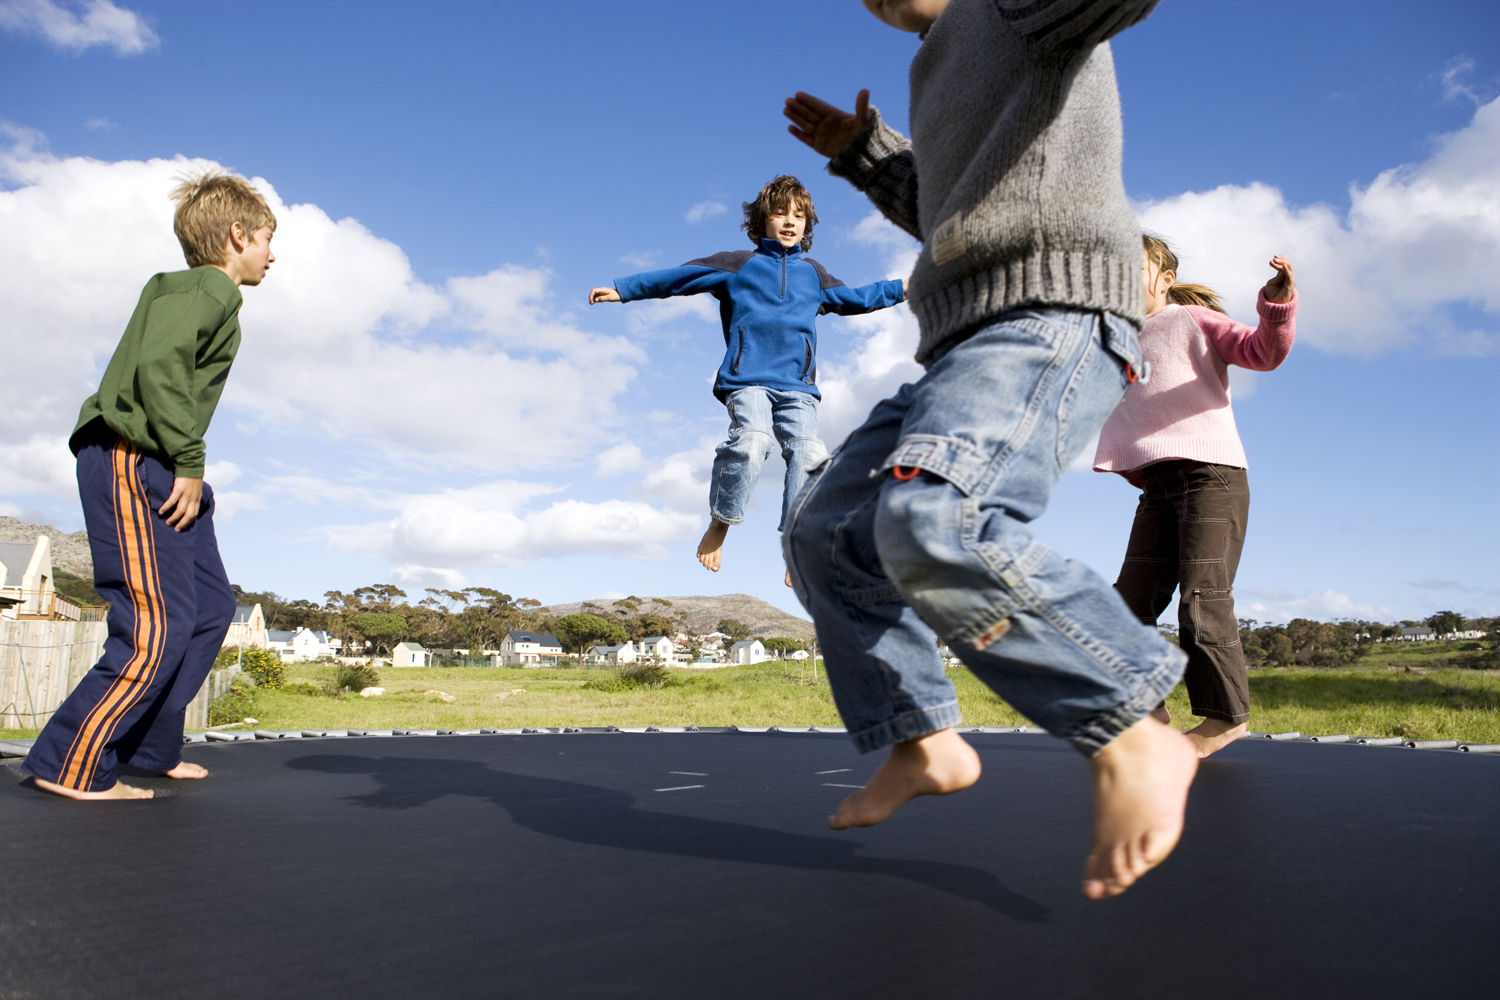 Trampolines are no place for kids, docs warn